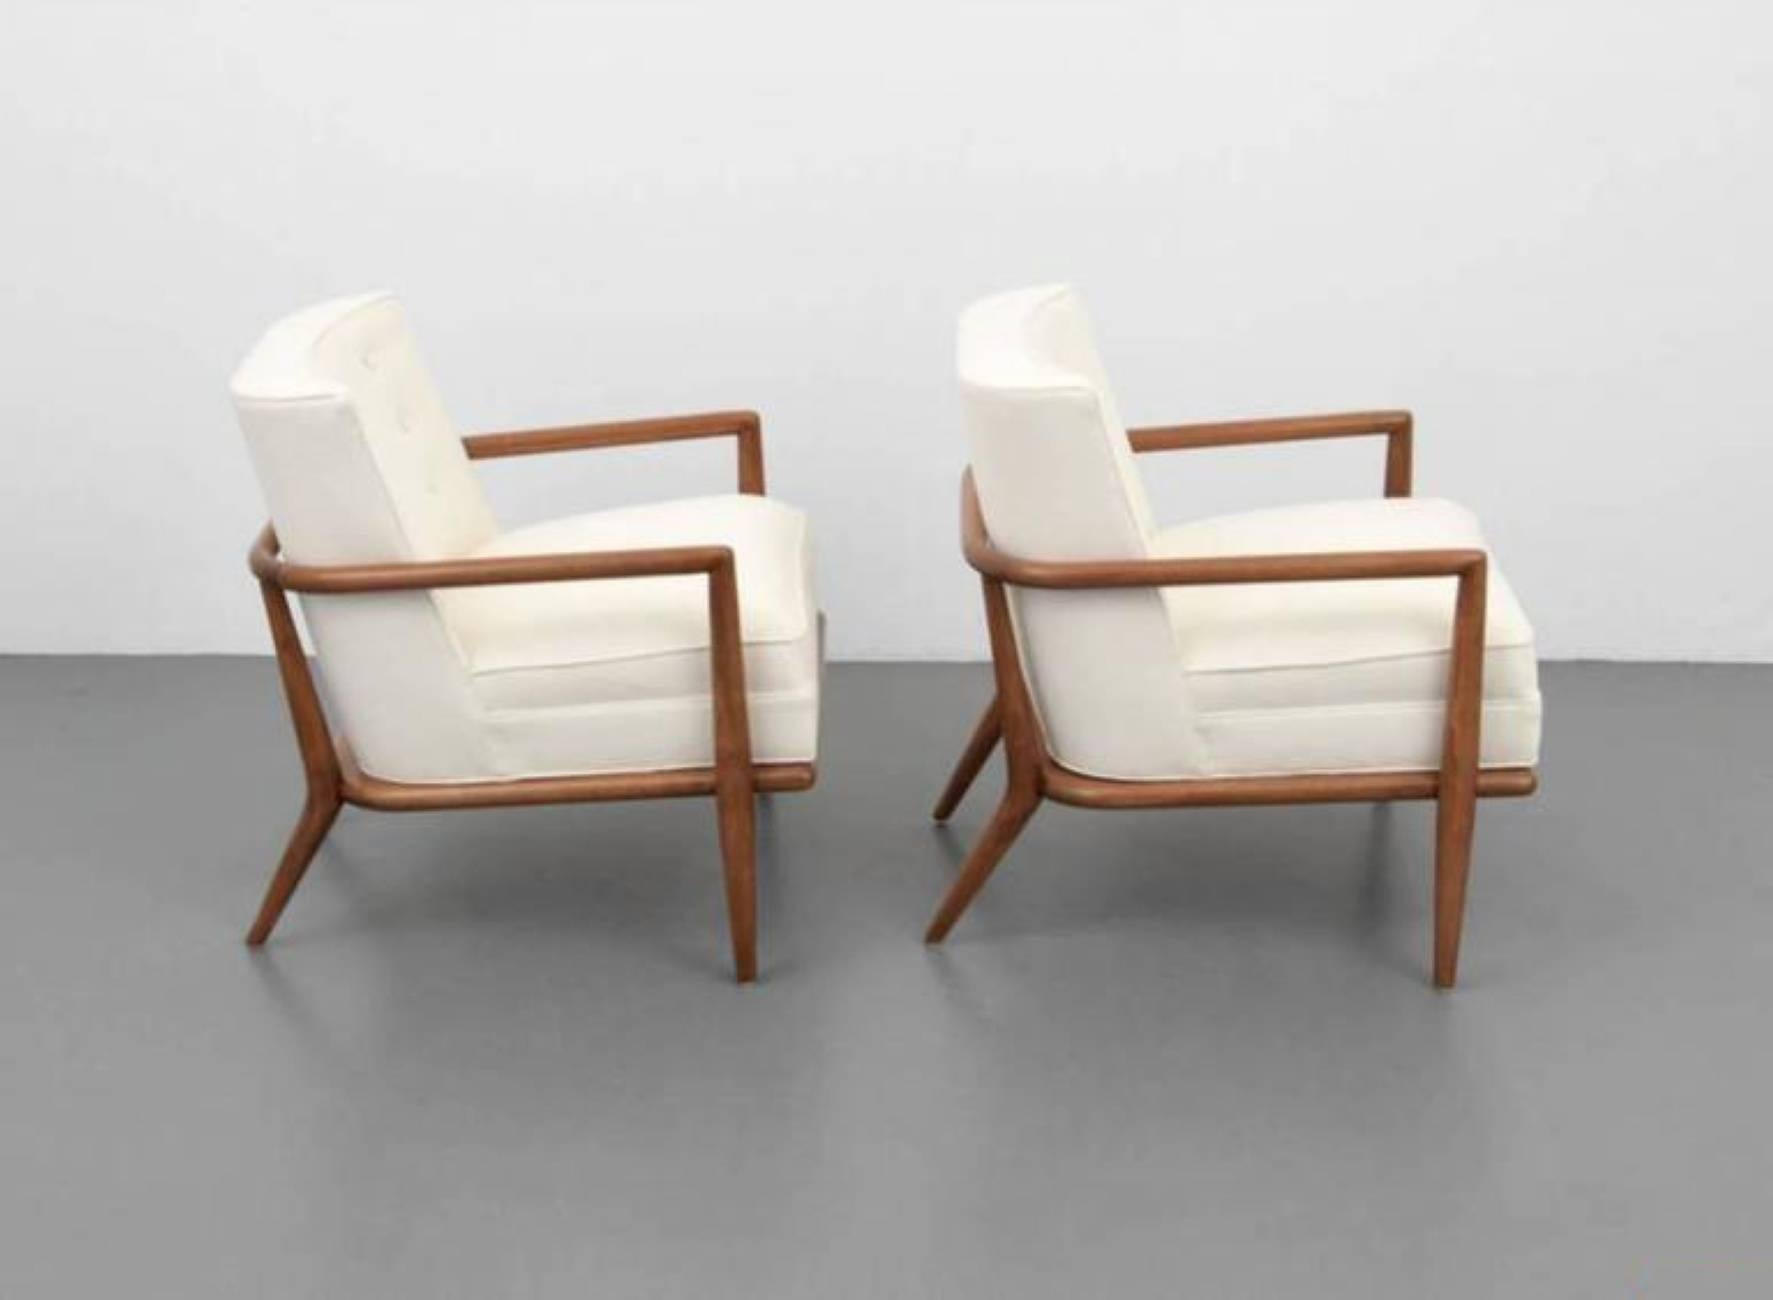 Pair of lounge chairs designed by Robsjohn-Gibbings and commissioned for the White Shadows estate. Provenance: Designed by Robsjohn-Gibbings for White Shadows, residence of Thomas B. Davis, Rancho Mirage, California; collection of Davis-Stibolt